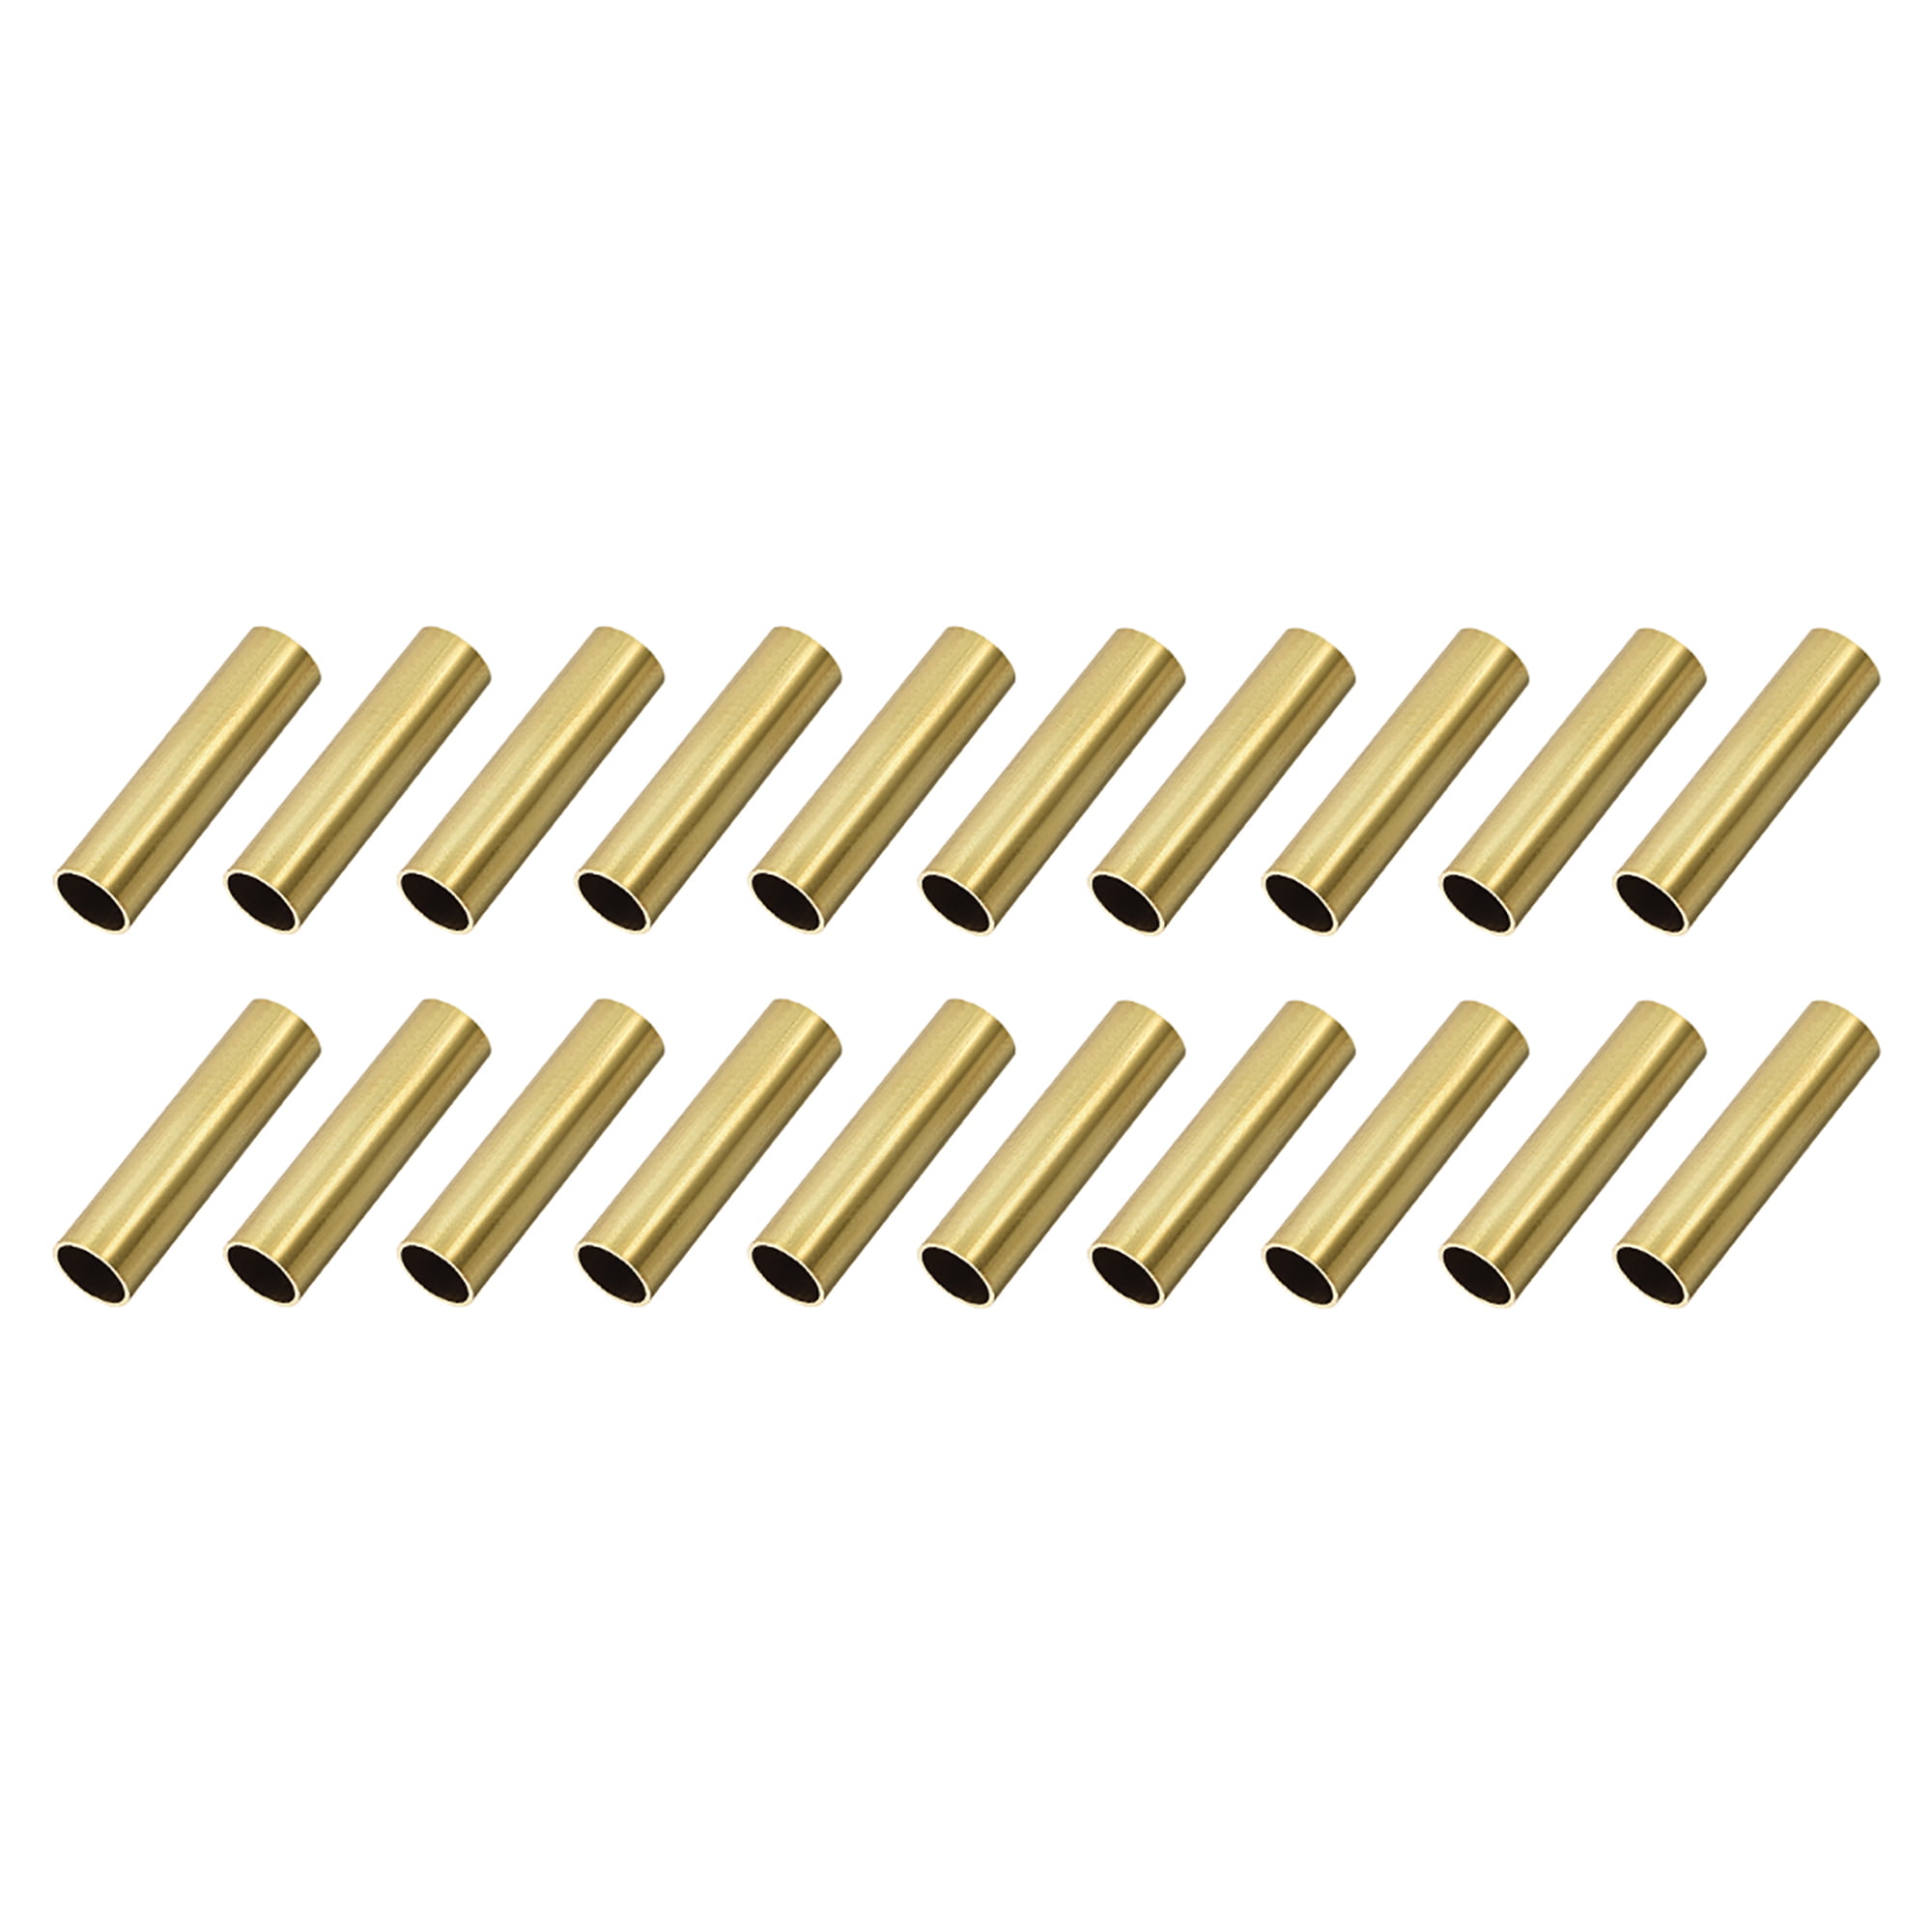 Round Brass Tube 300 mm Length 8 mm OD 1 mm Wall Thickness Seamless Straight Pipe Tube 2 Pieces 